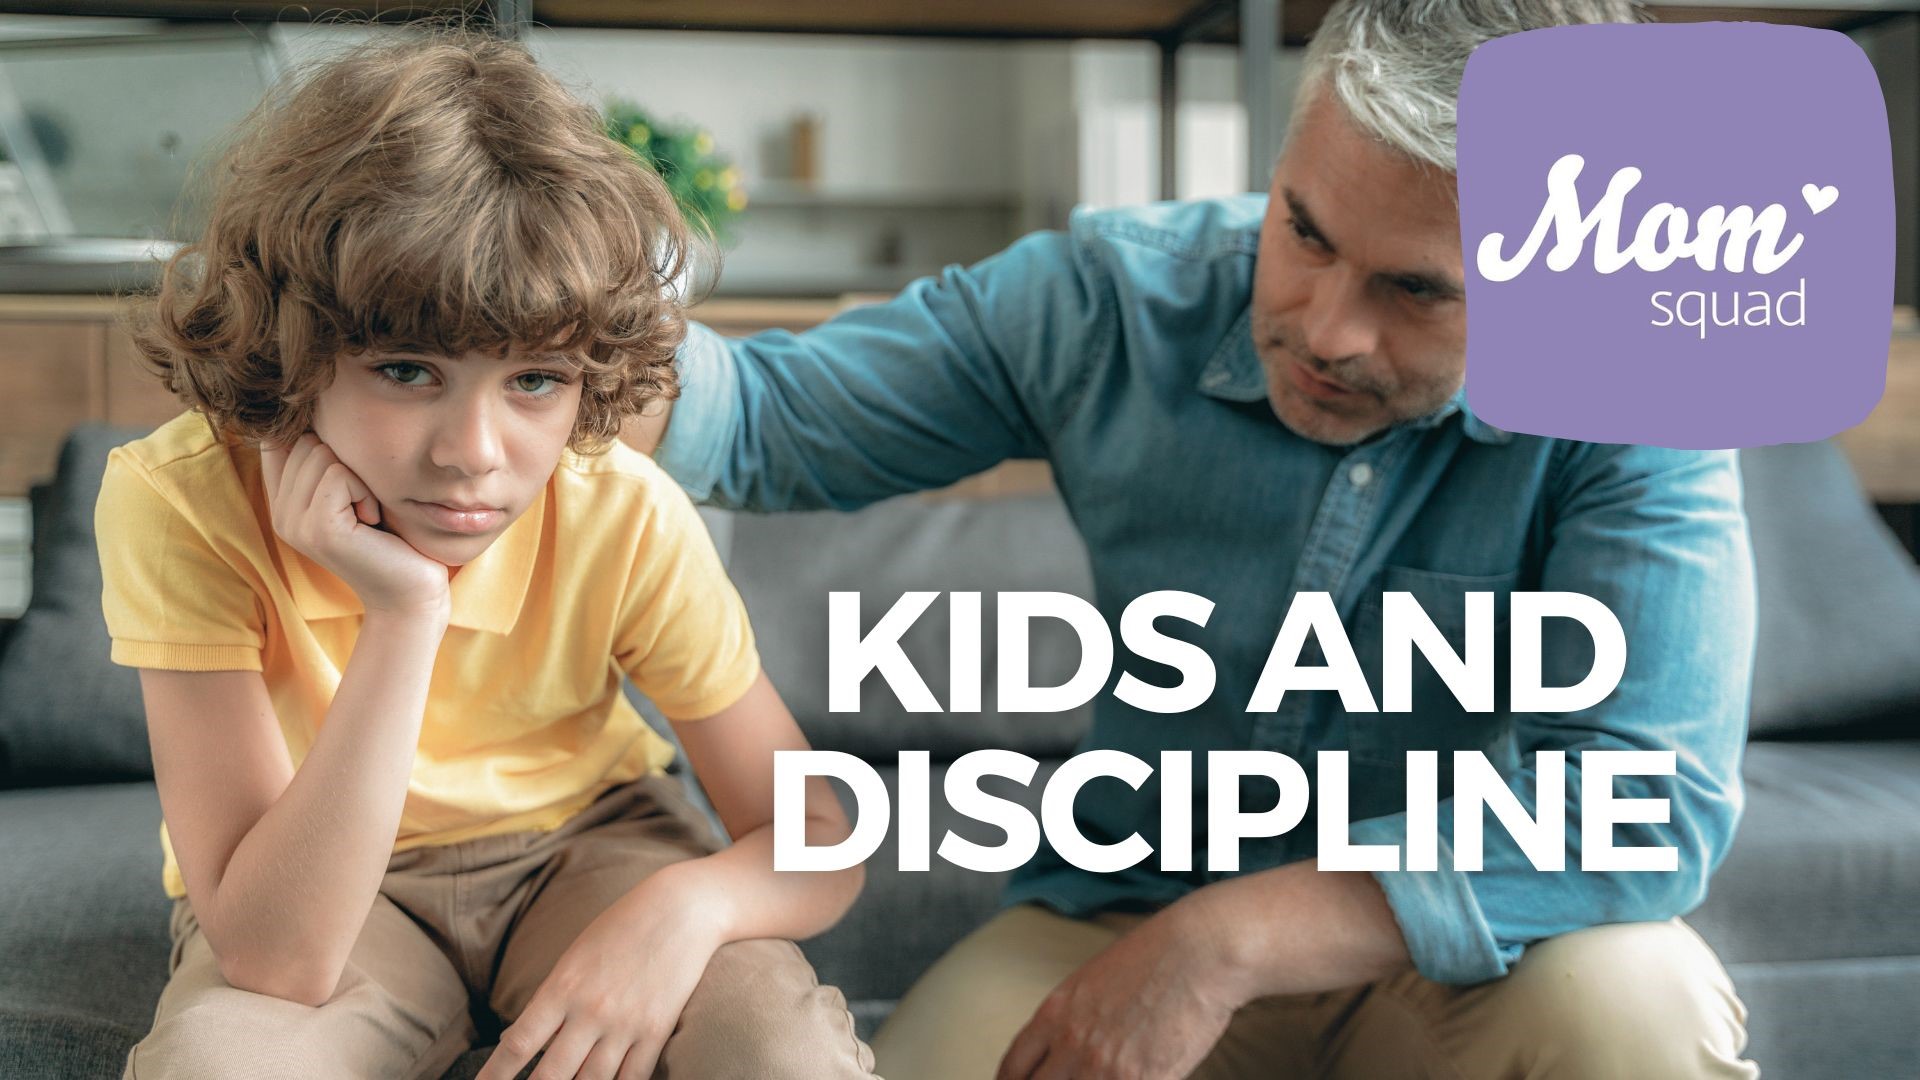 WKYC's Maureen Kyle discusses how to effectively discipline your kids without using hurtful words. Dr. Kim Bell shares her thoughts on discipline.